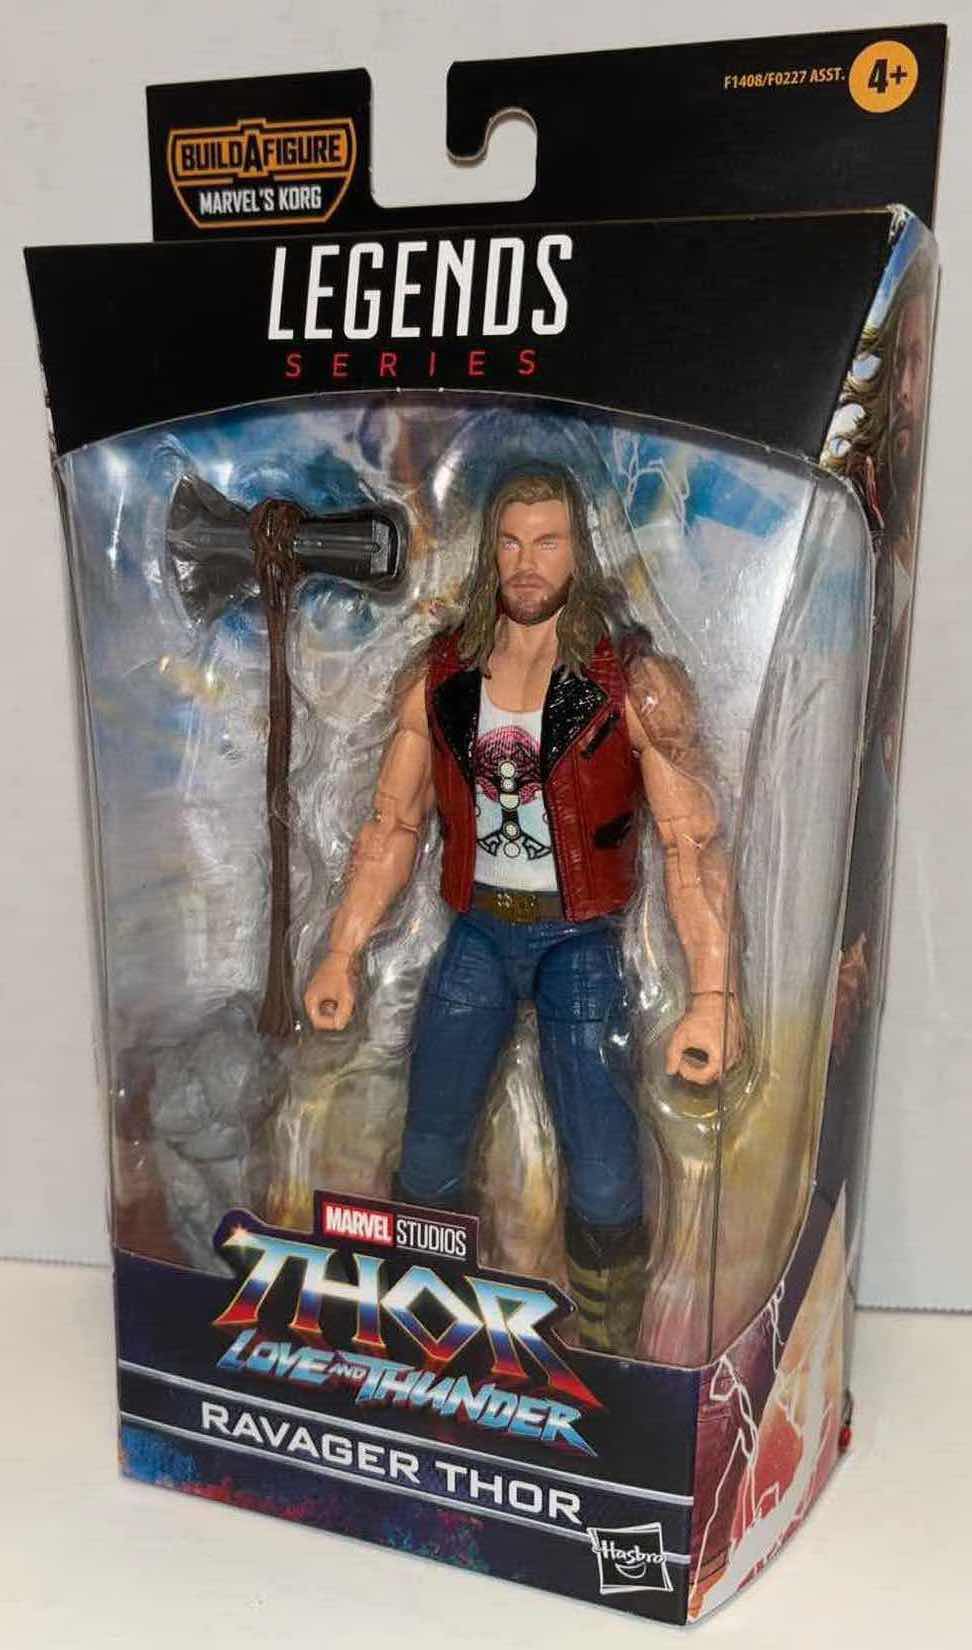 Photo 2 of NEW HASBRO LEGENDS SERIES ACTION FIGURE & ACCESSORIES, THOR LOVE AND THUNDER “RAVAGER THOR”